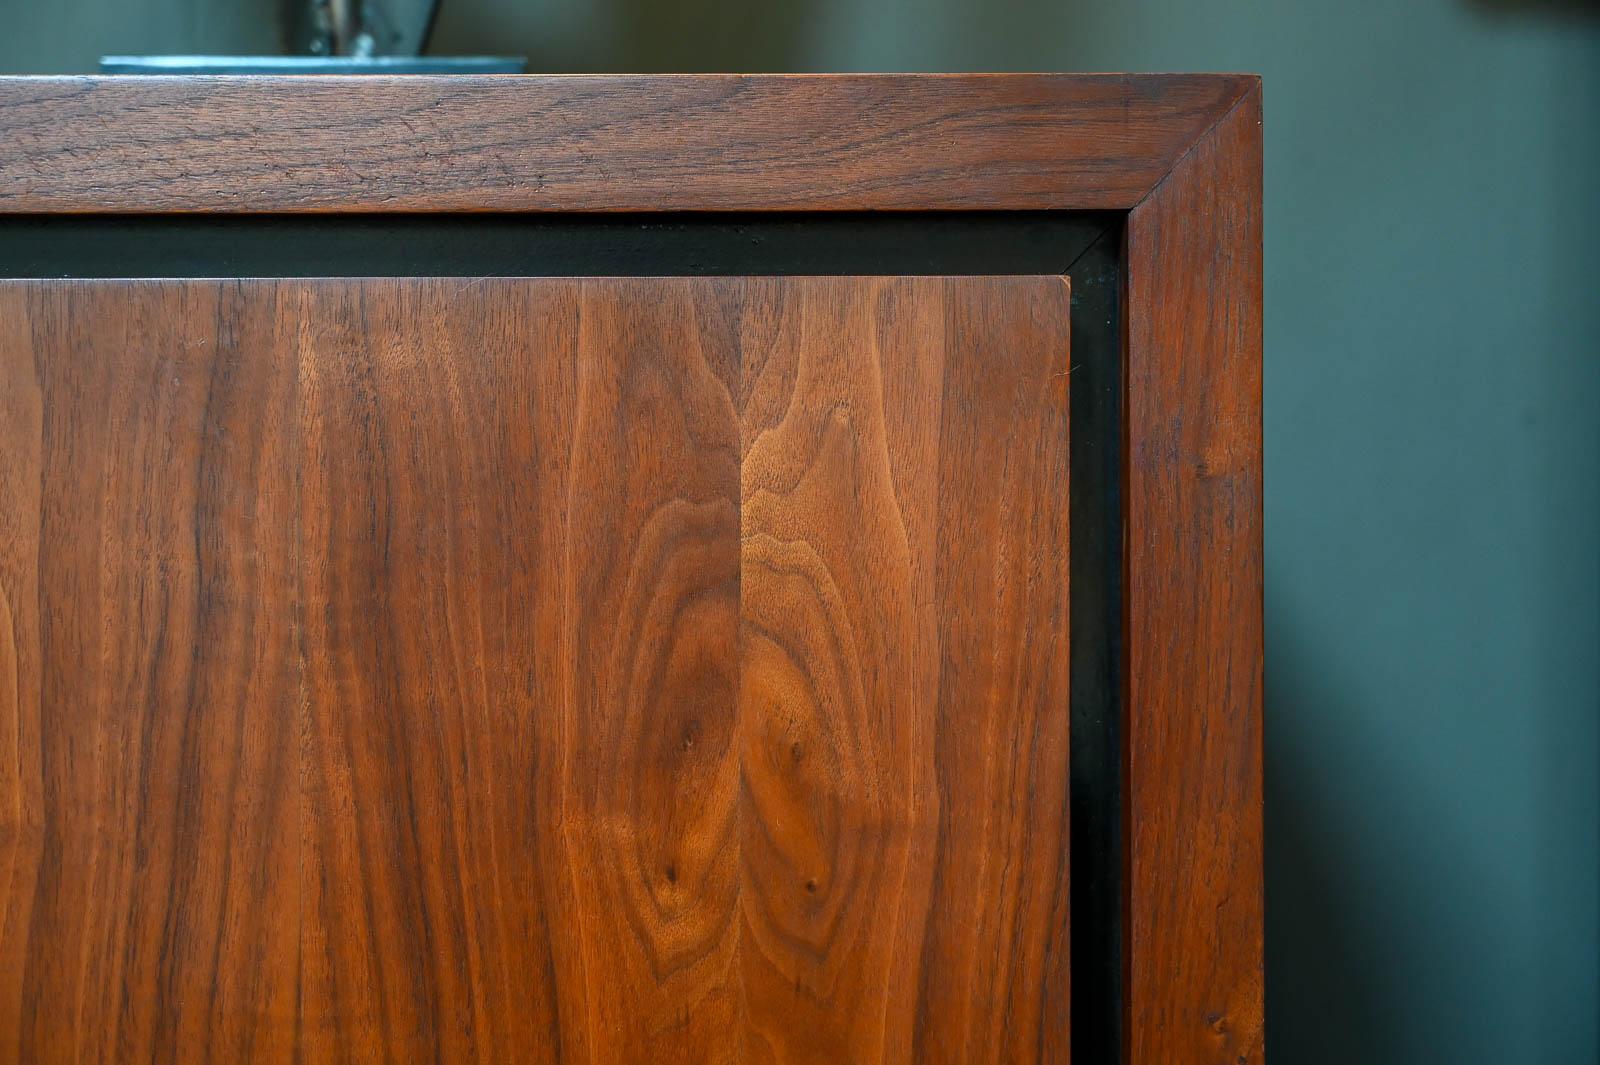 Late 20th Century Walnut Credenza by Merton Gershun for Dillingham, ca. 1970